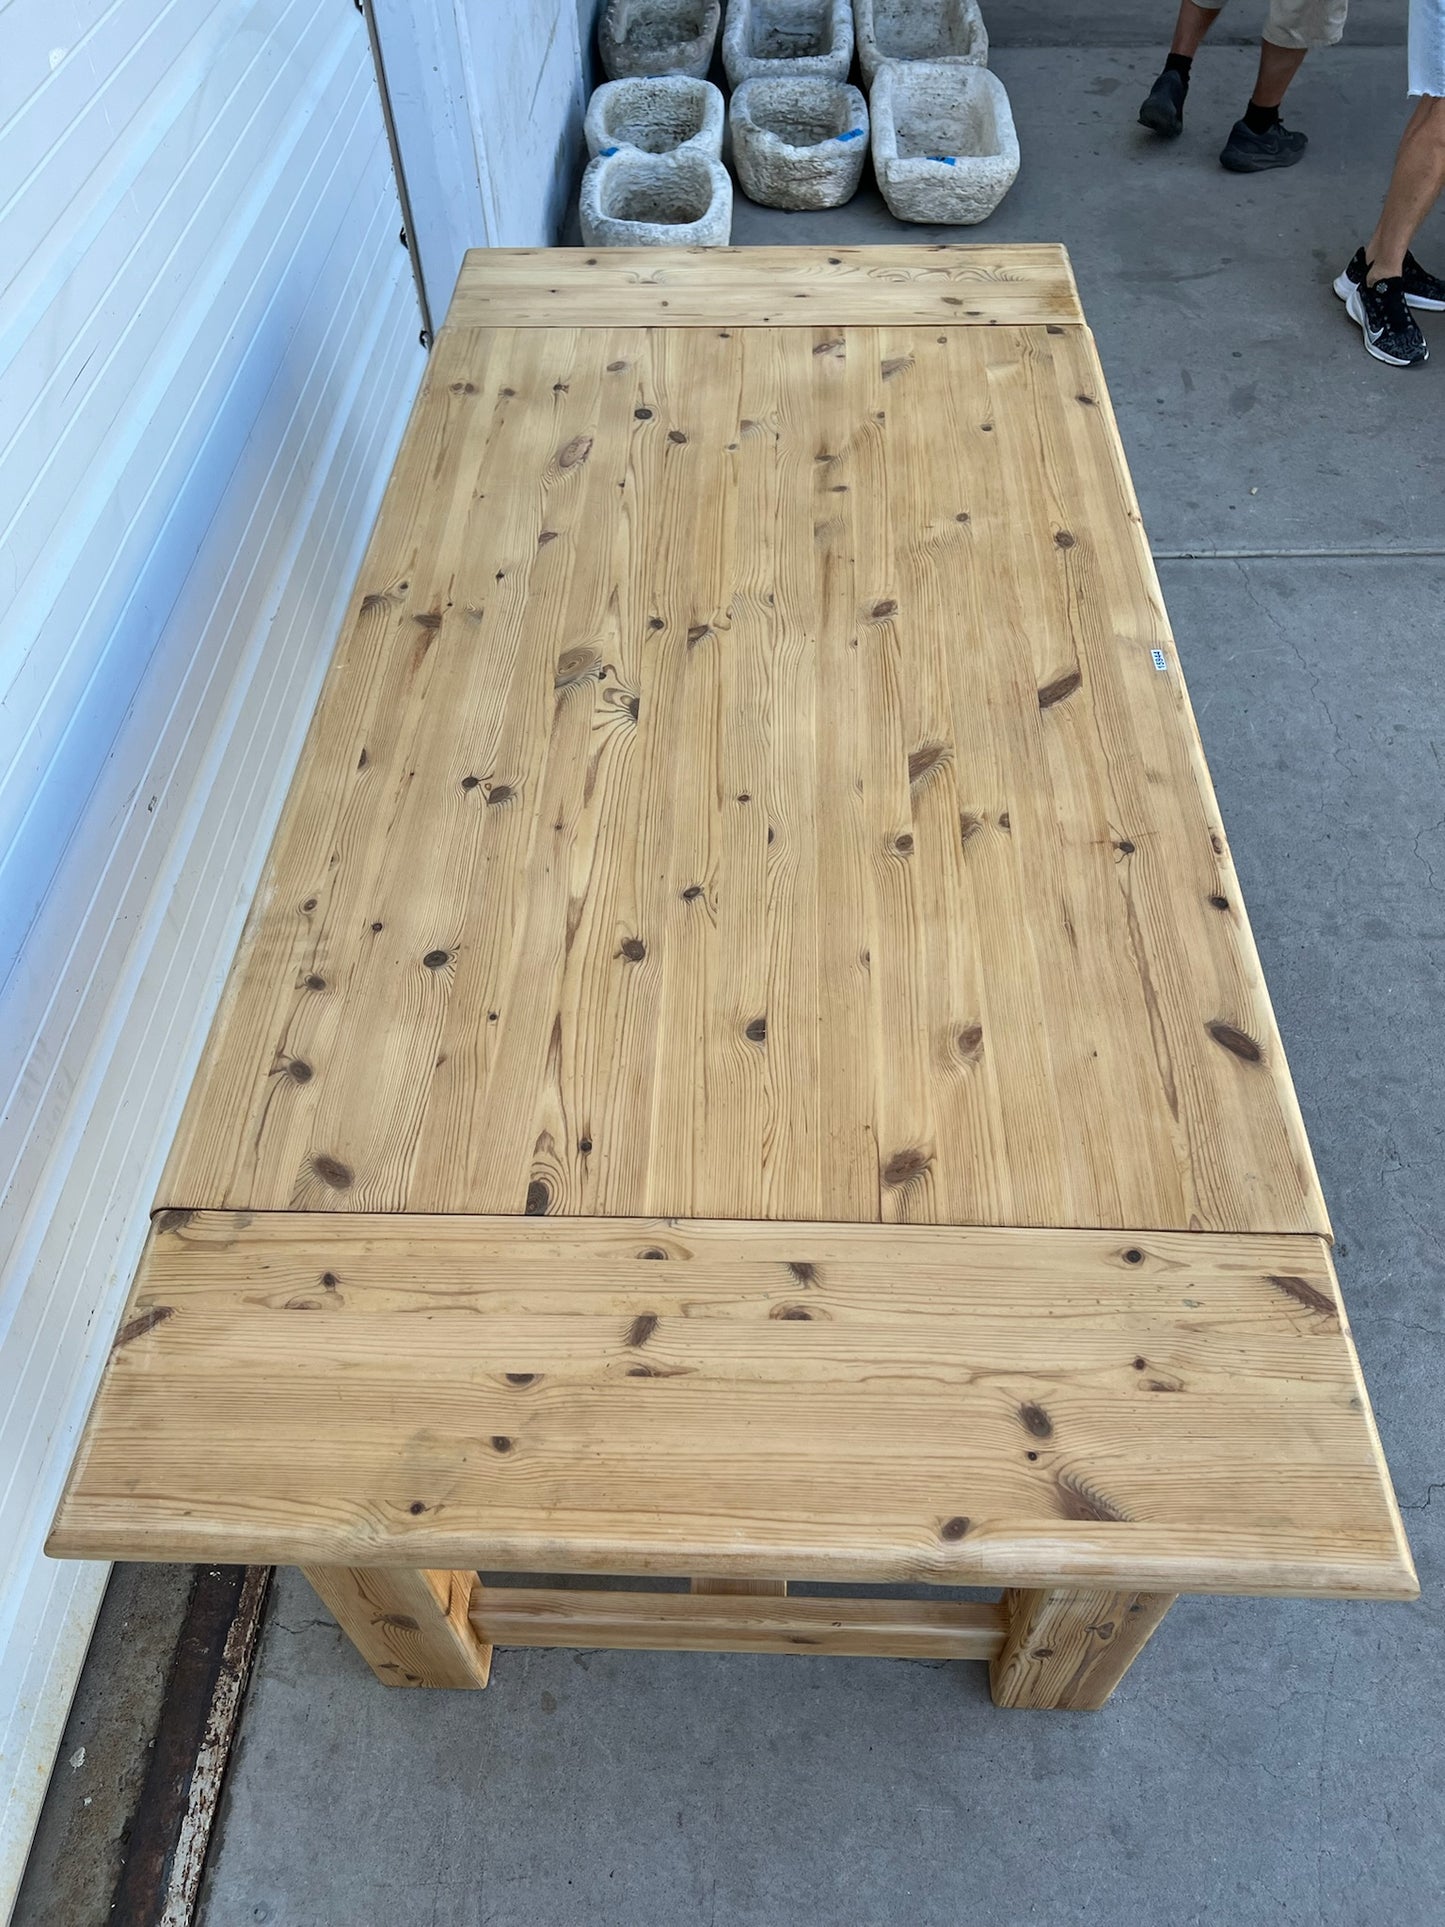 Rectangular Danish Pine Dining Table with 2 Leaves